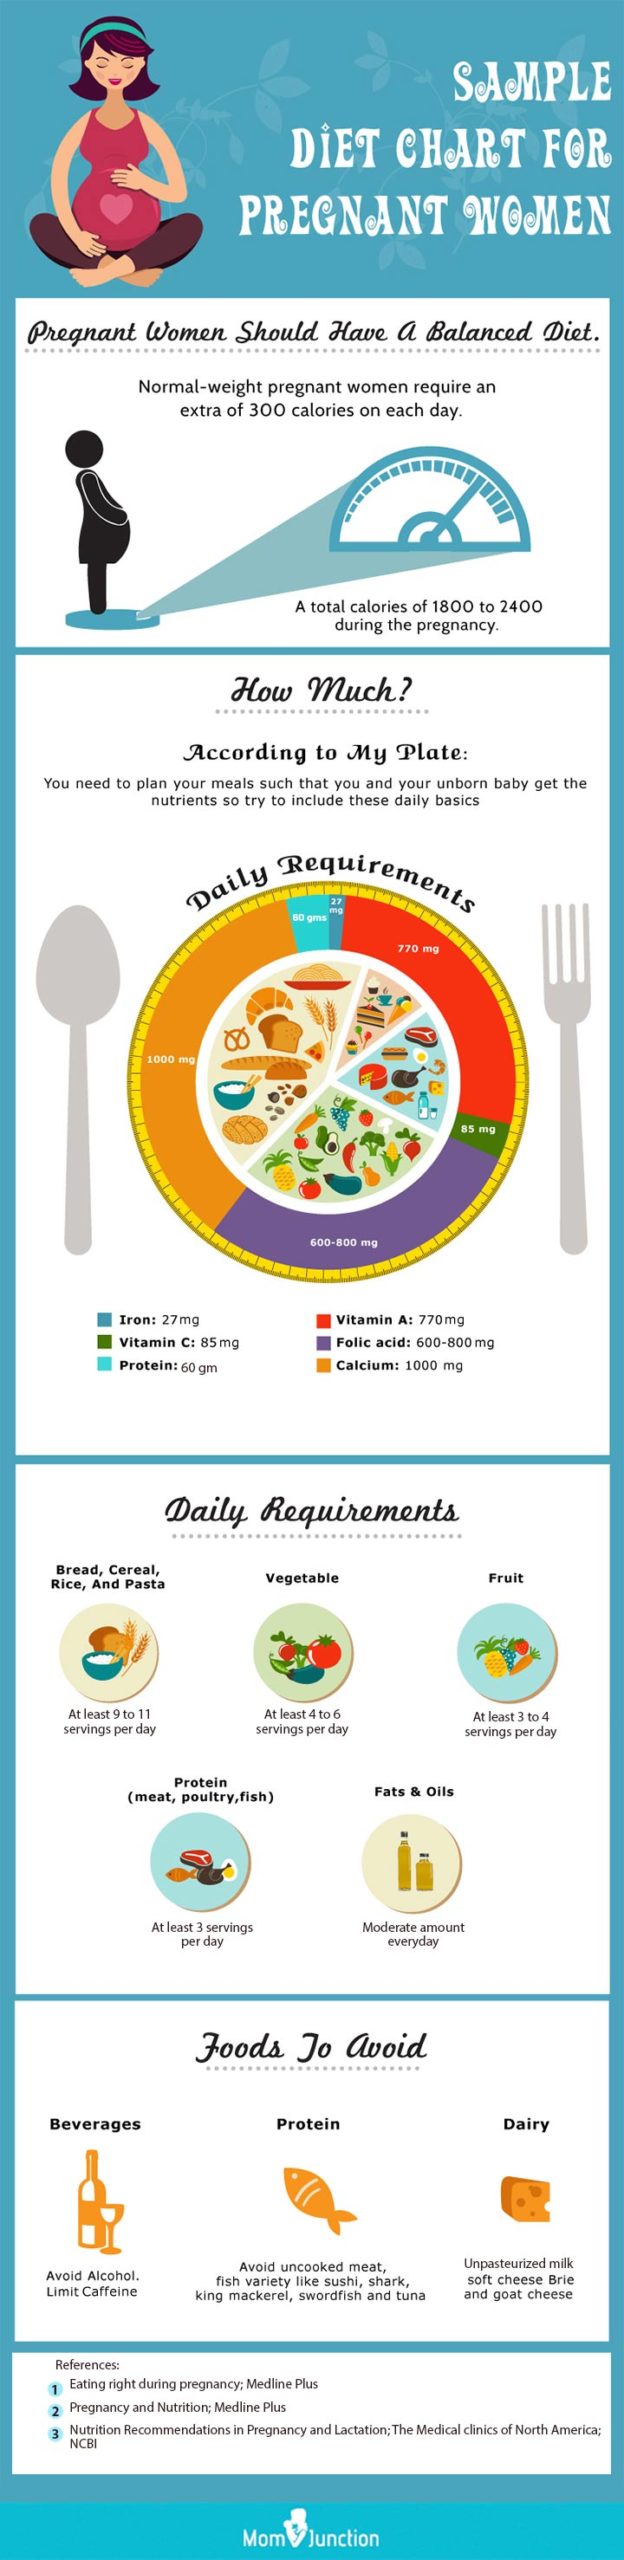 pregnancy diet sample chart and general dietary guidelines (infographic)